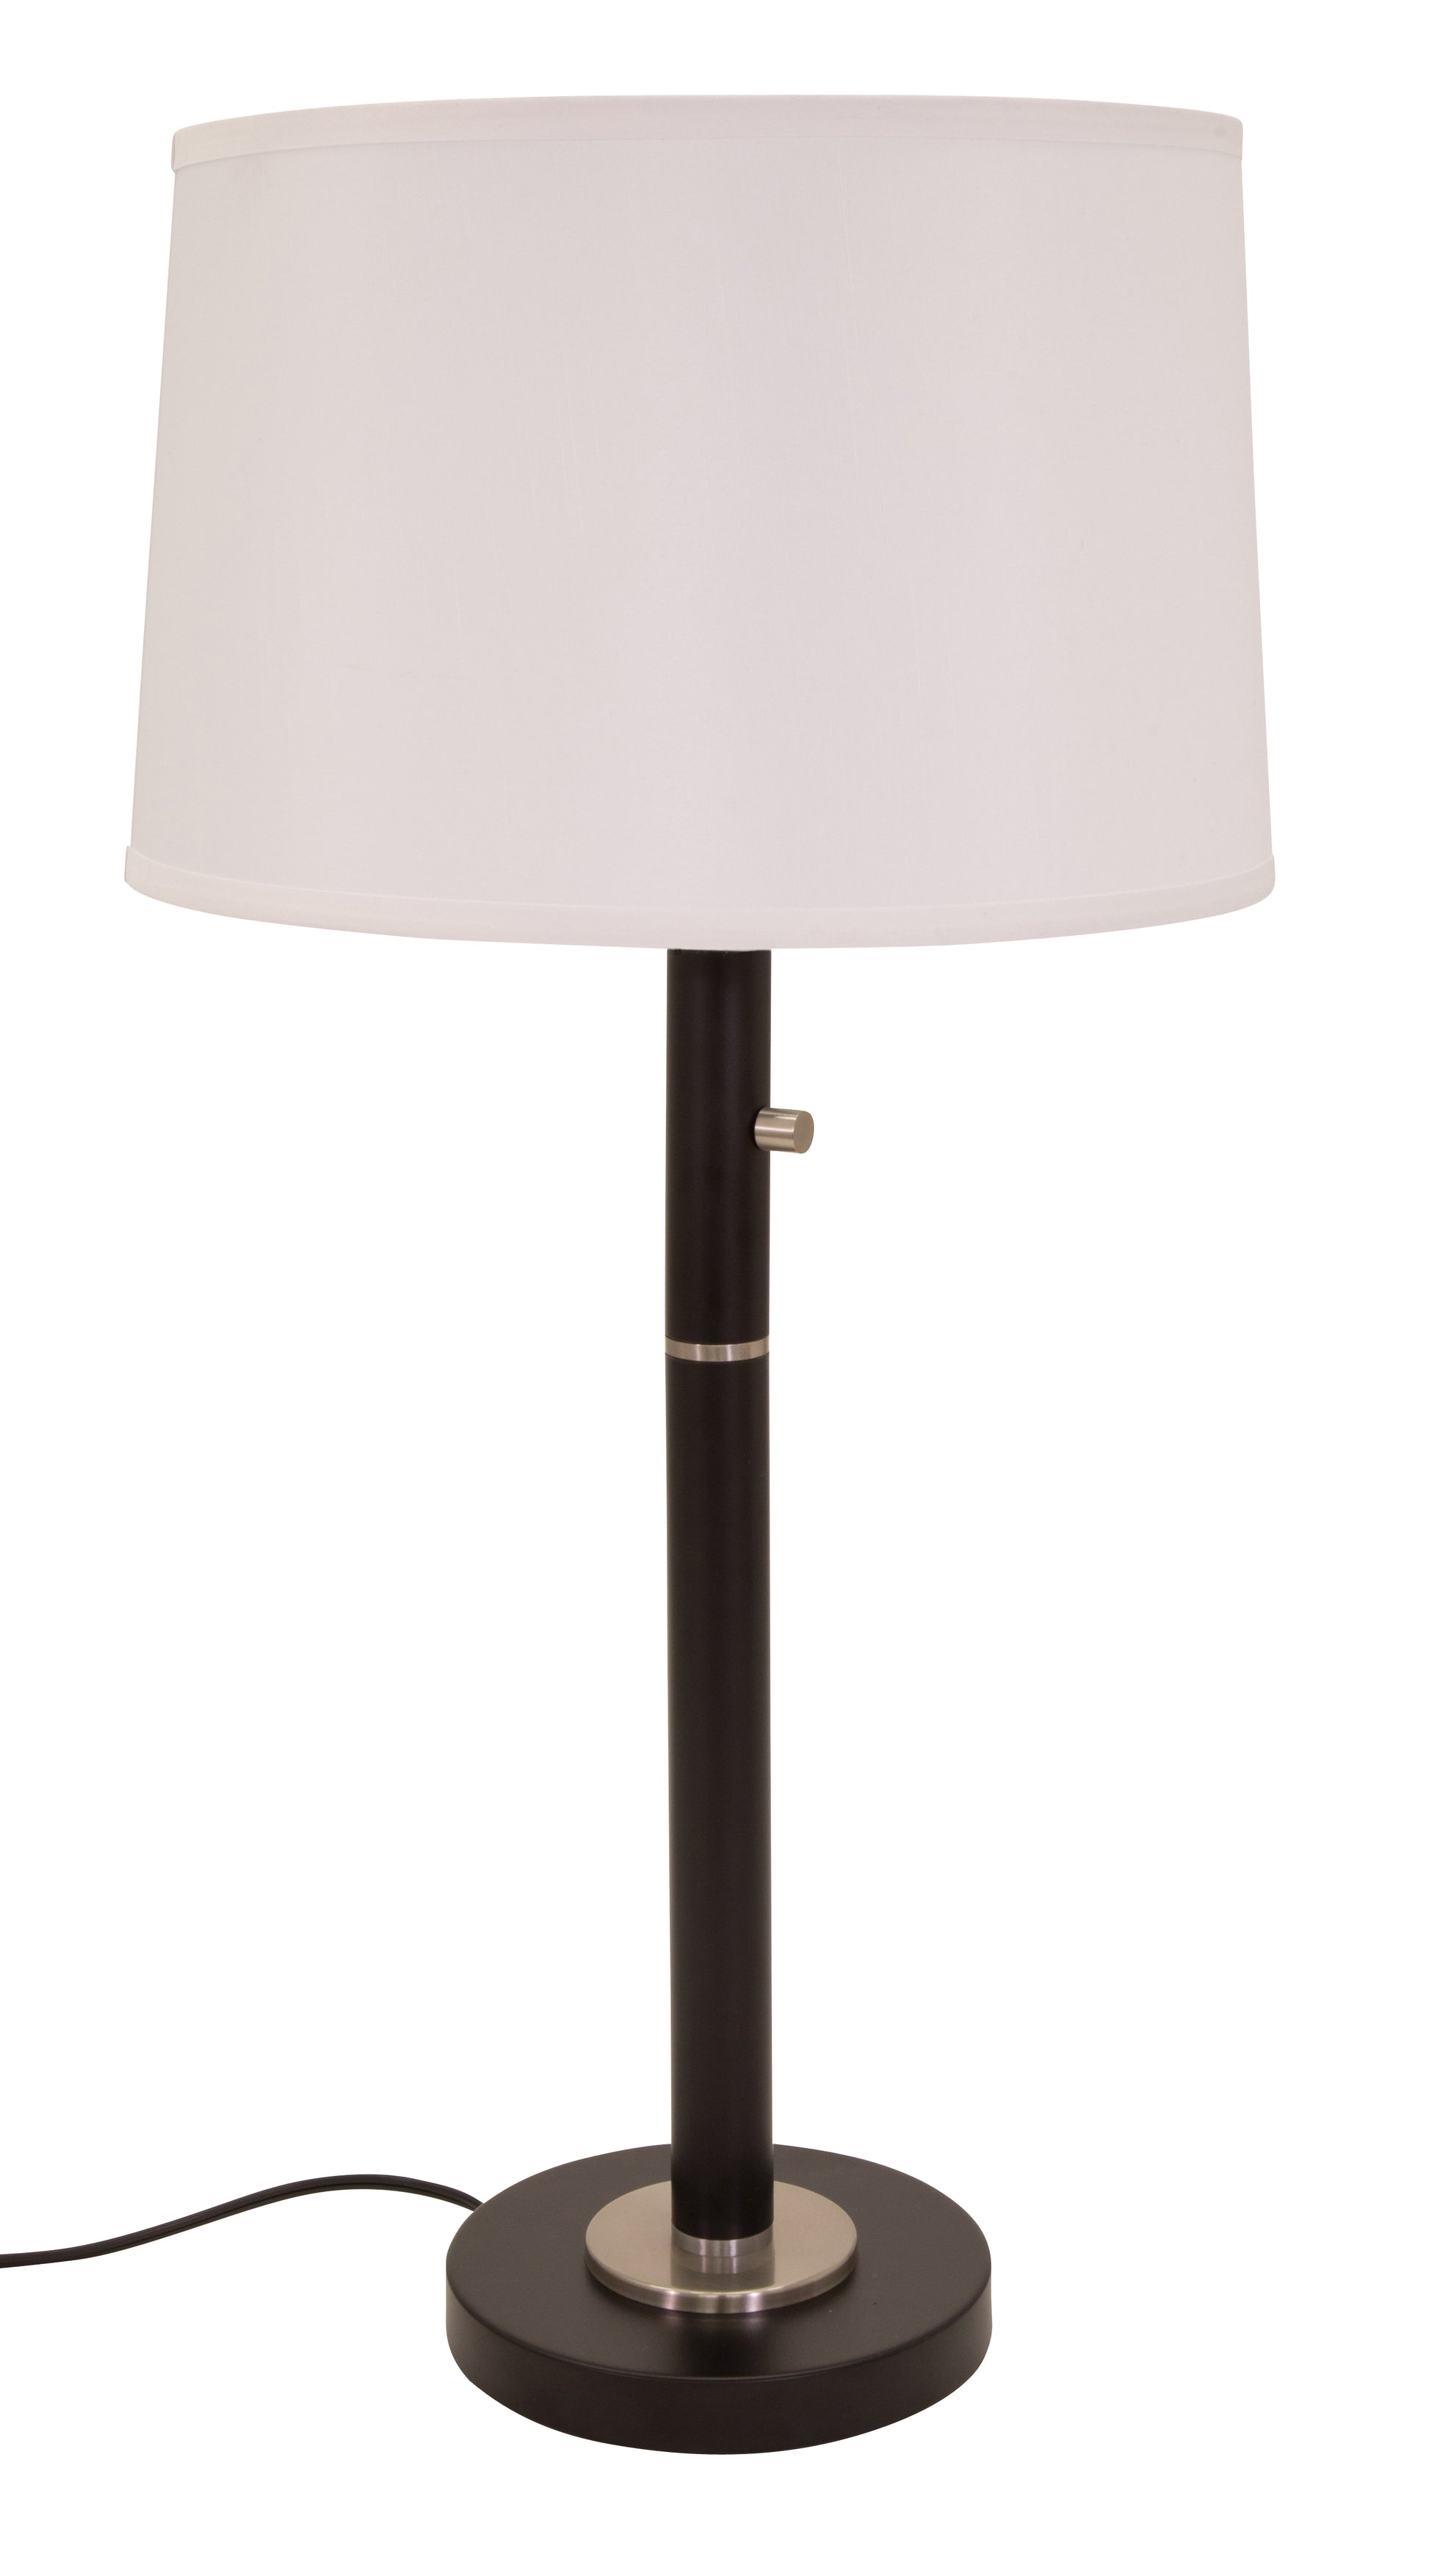 House of Troy Rupert three way table lamp in Black with satin nickel accents and USB port RU750-BLK